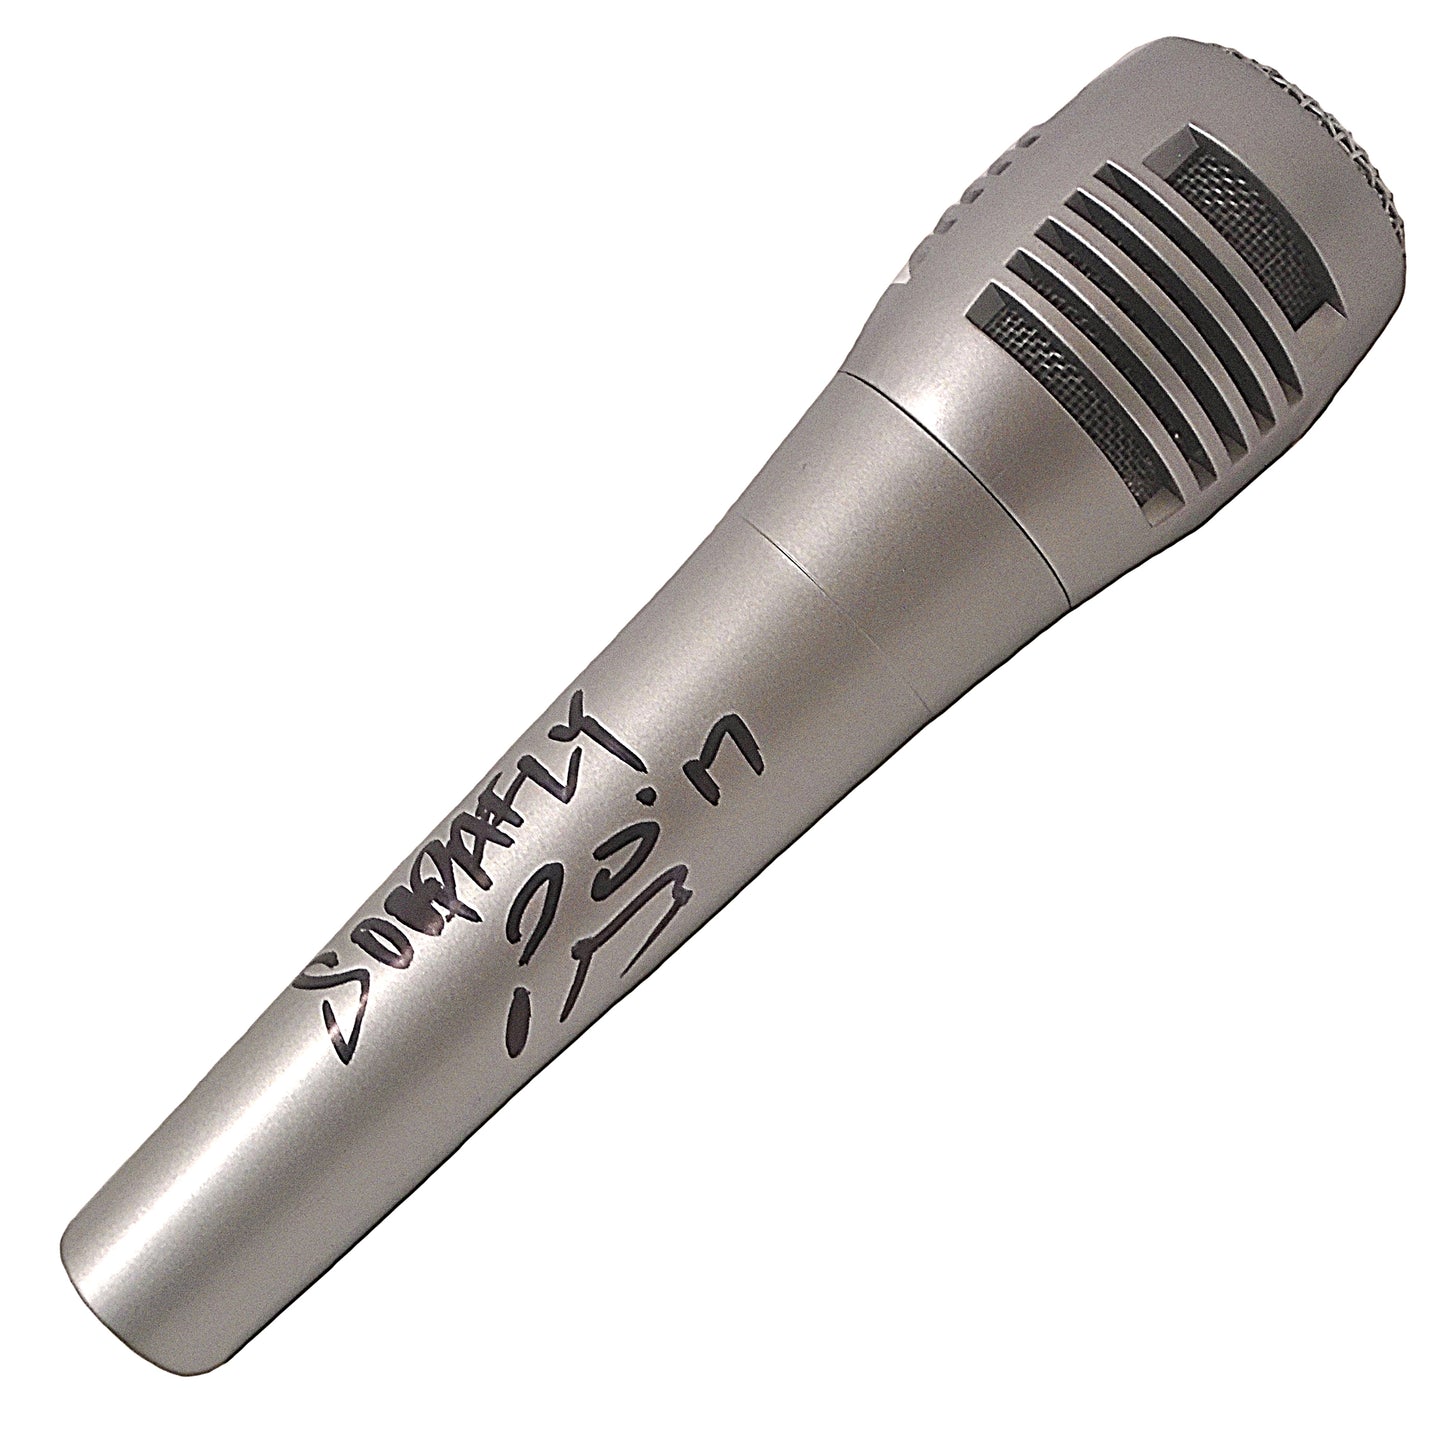 Music-Autographed - Rapper Soopafly Signed Pyle Full Size Microphone, Proof Photo - Beckett BAS 203